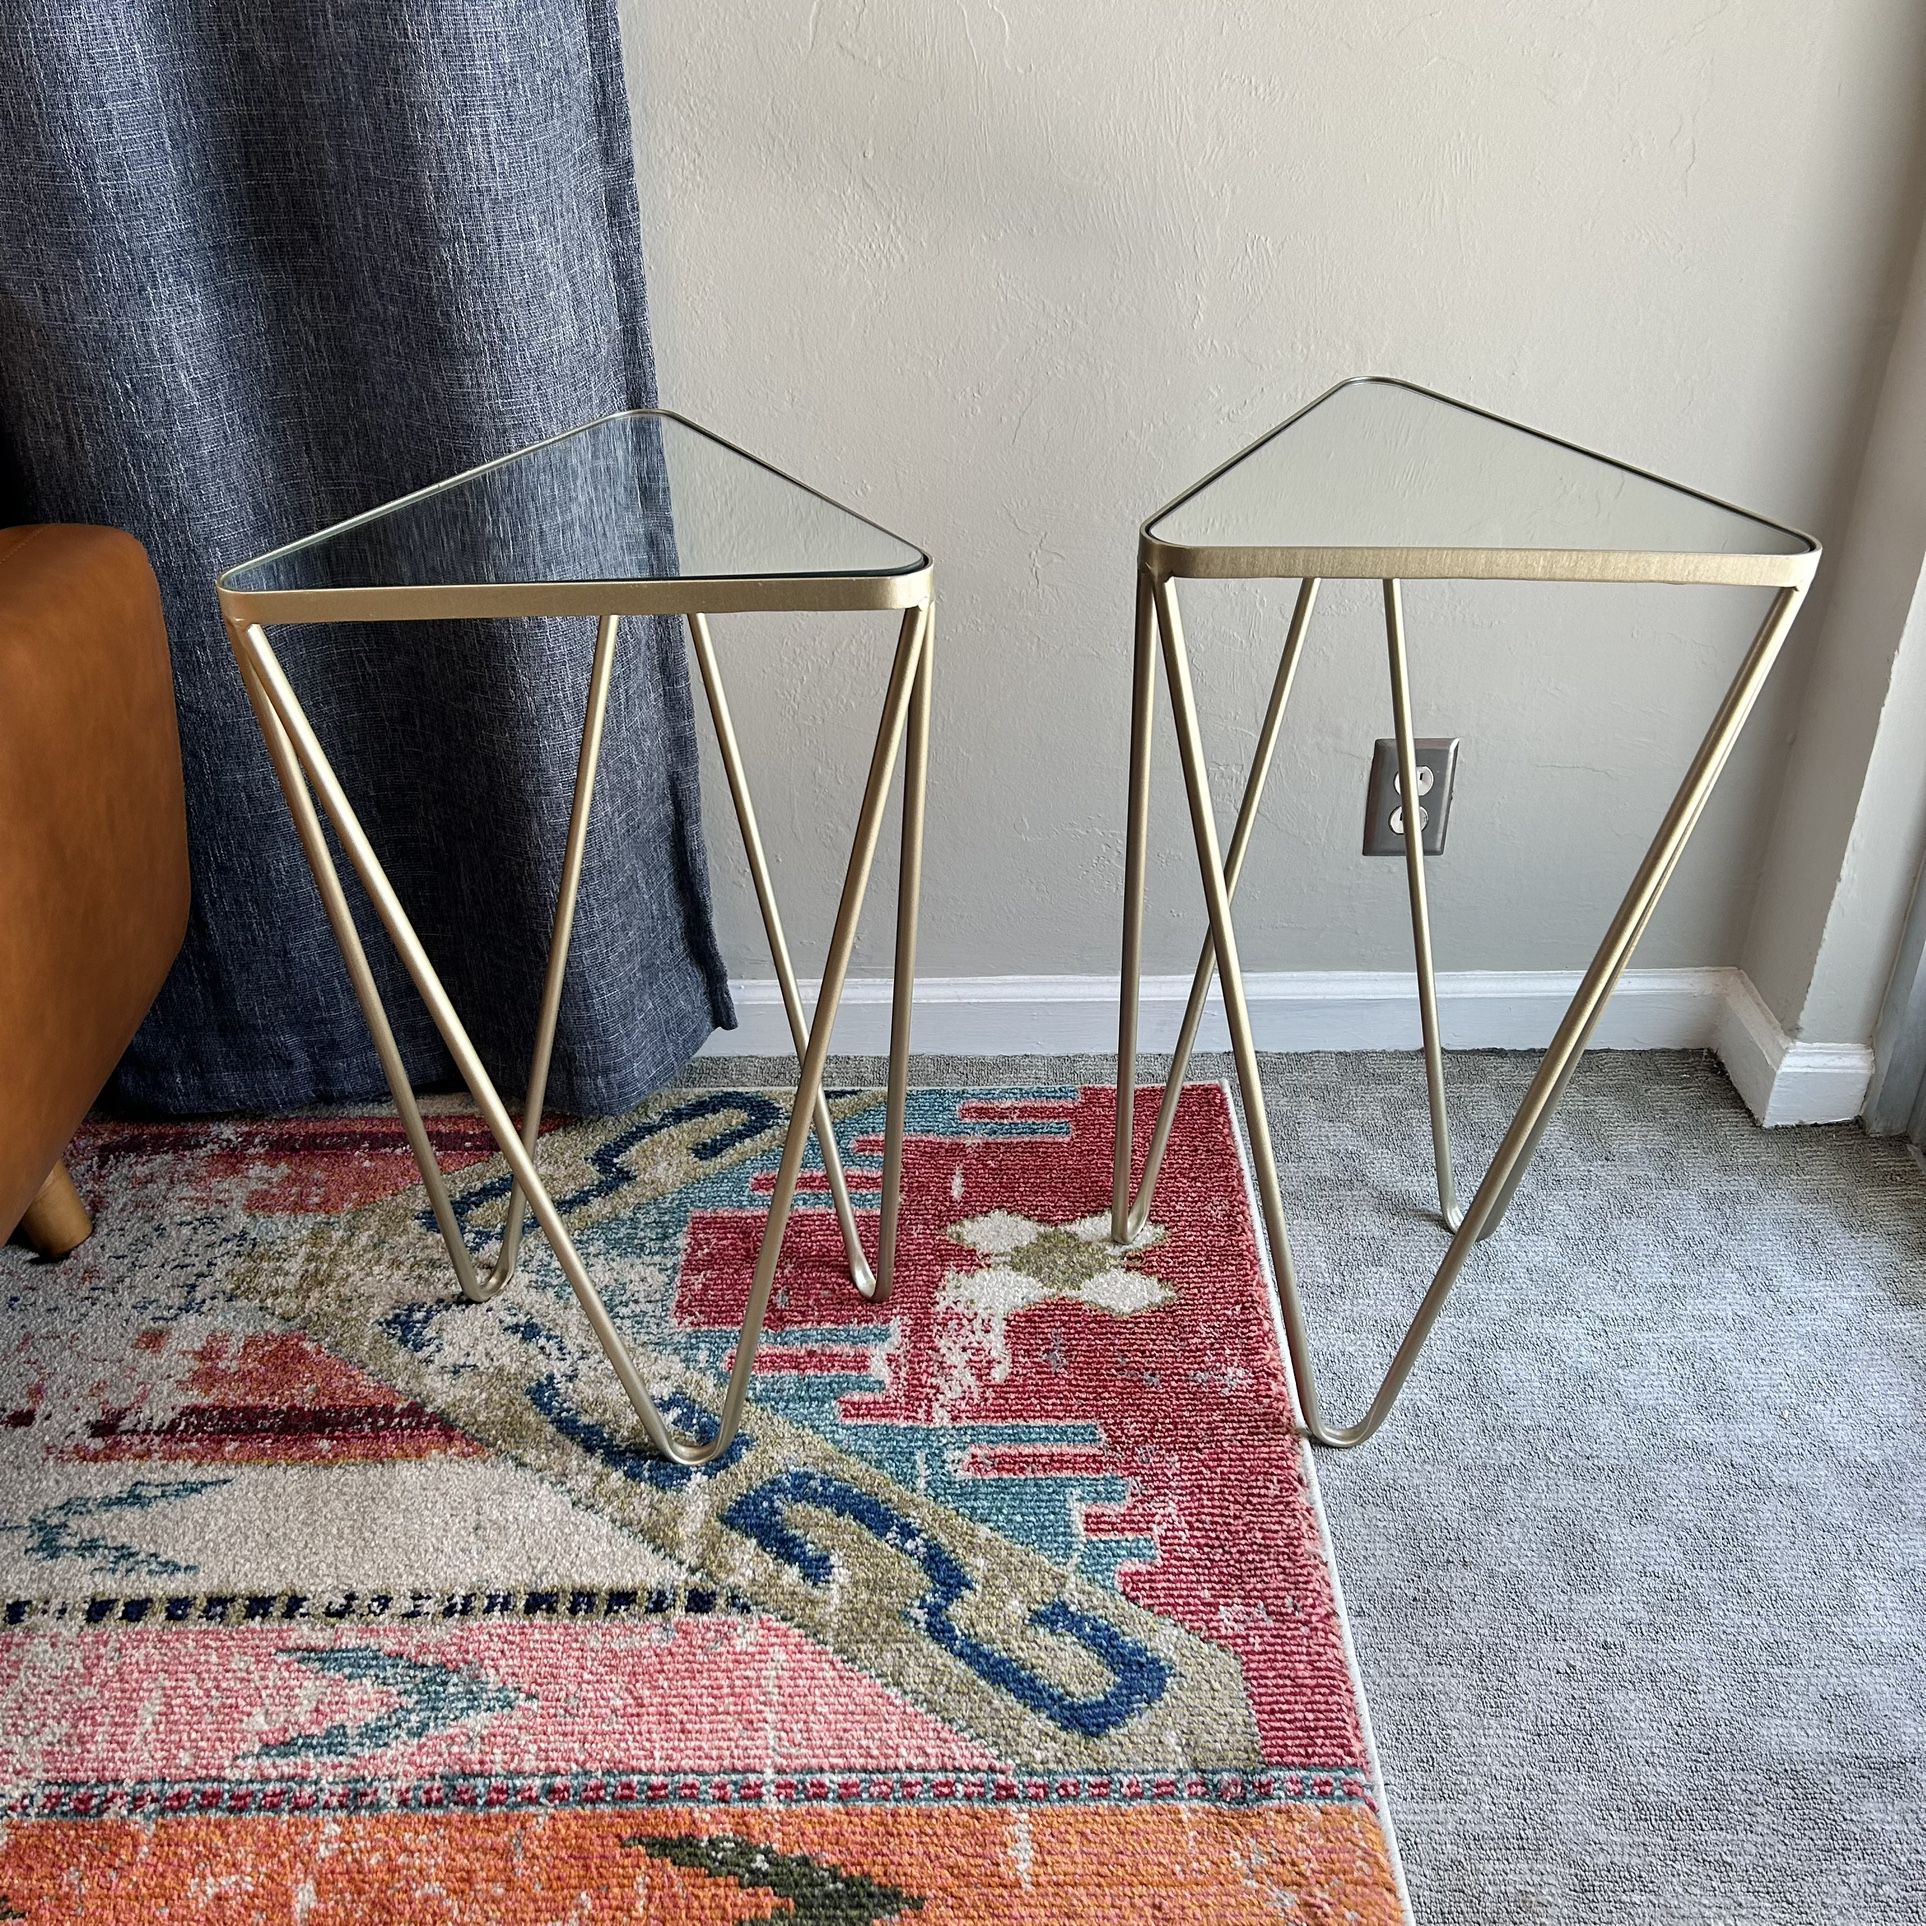 Set of 2 Gold Metal and Glass/Mirror Side Tables in Good/Used Condition — $50 OBO